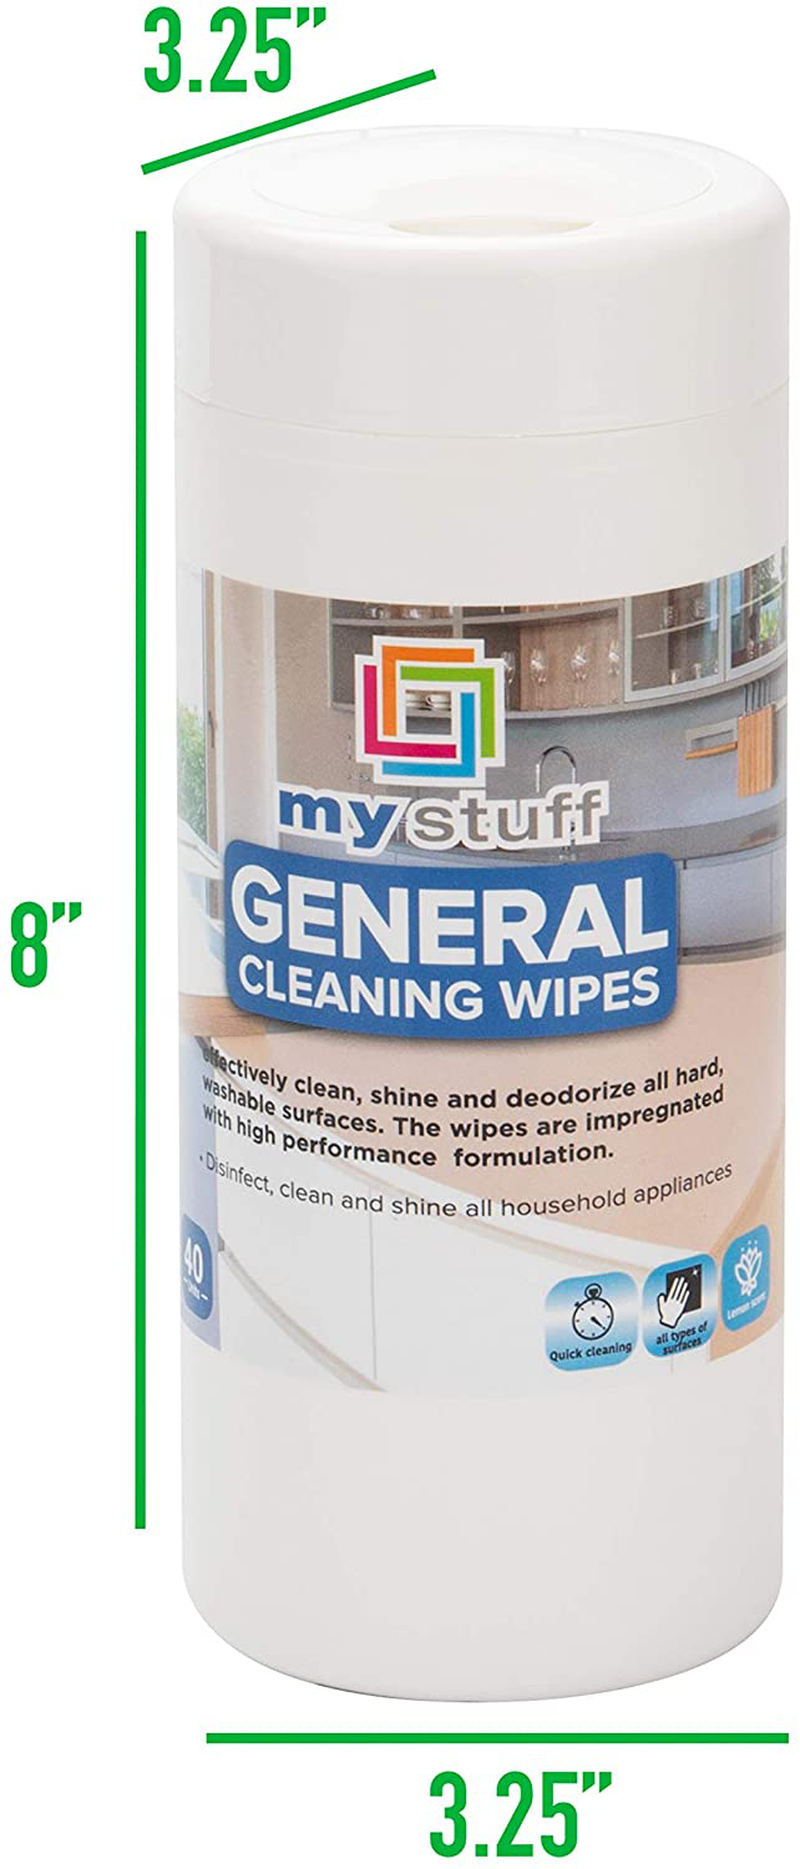 My Stuff All-Purpose Interior Wipes, Cleansing Cloths for Home, Office Surfaces, Dusting Sheets, Fresh Lemon Scent, 40-ct.